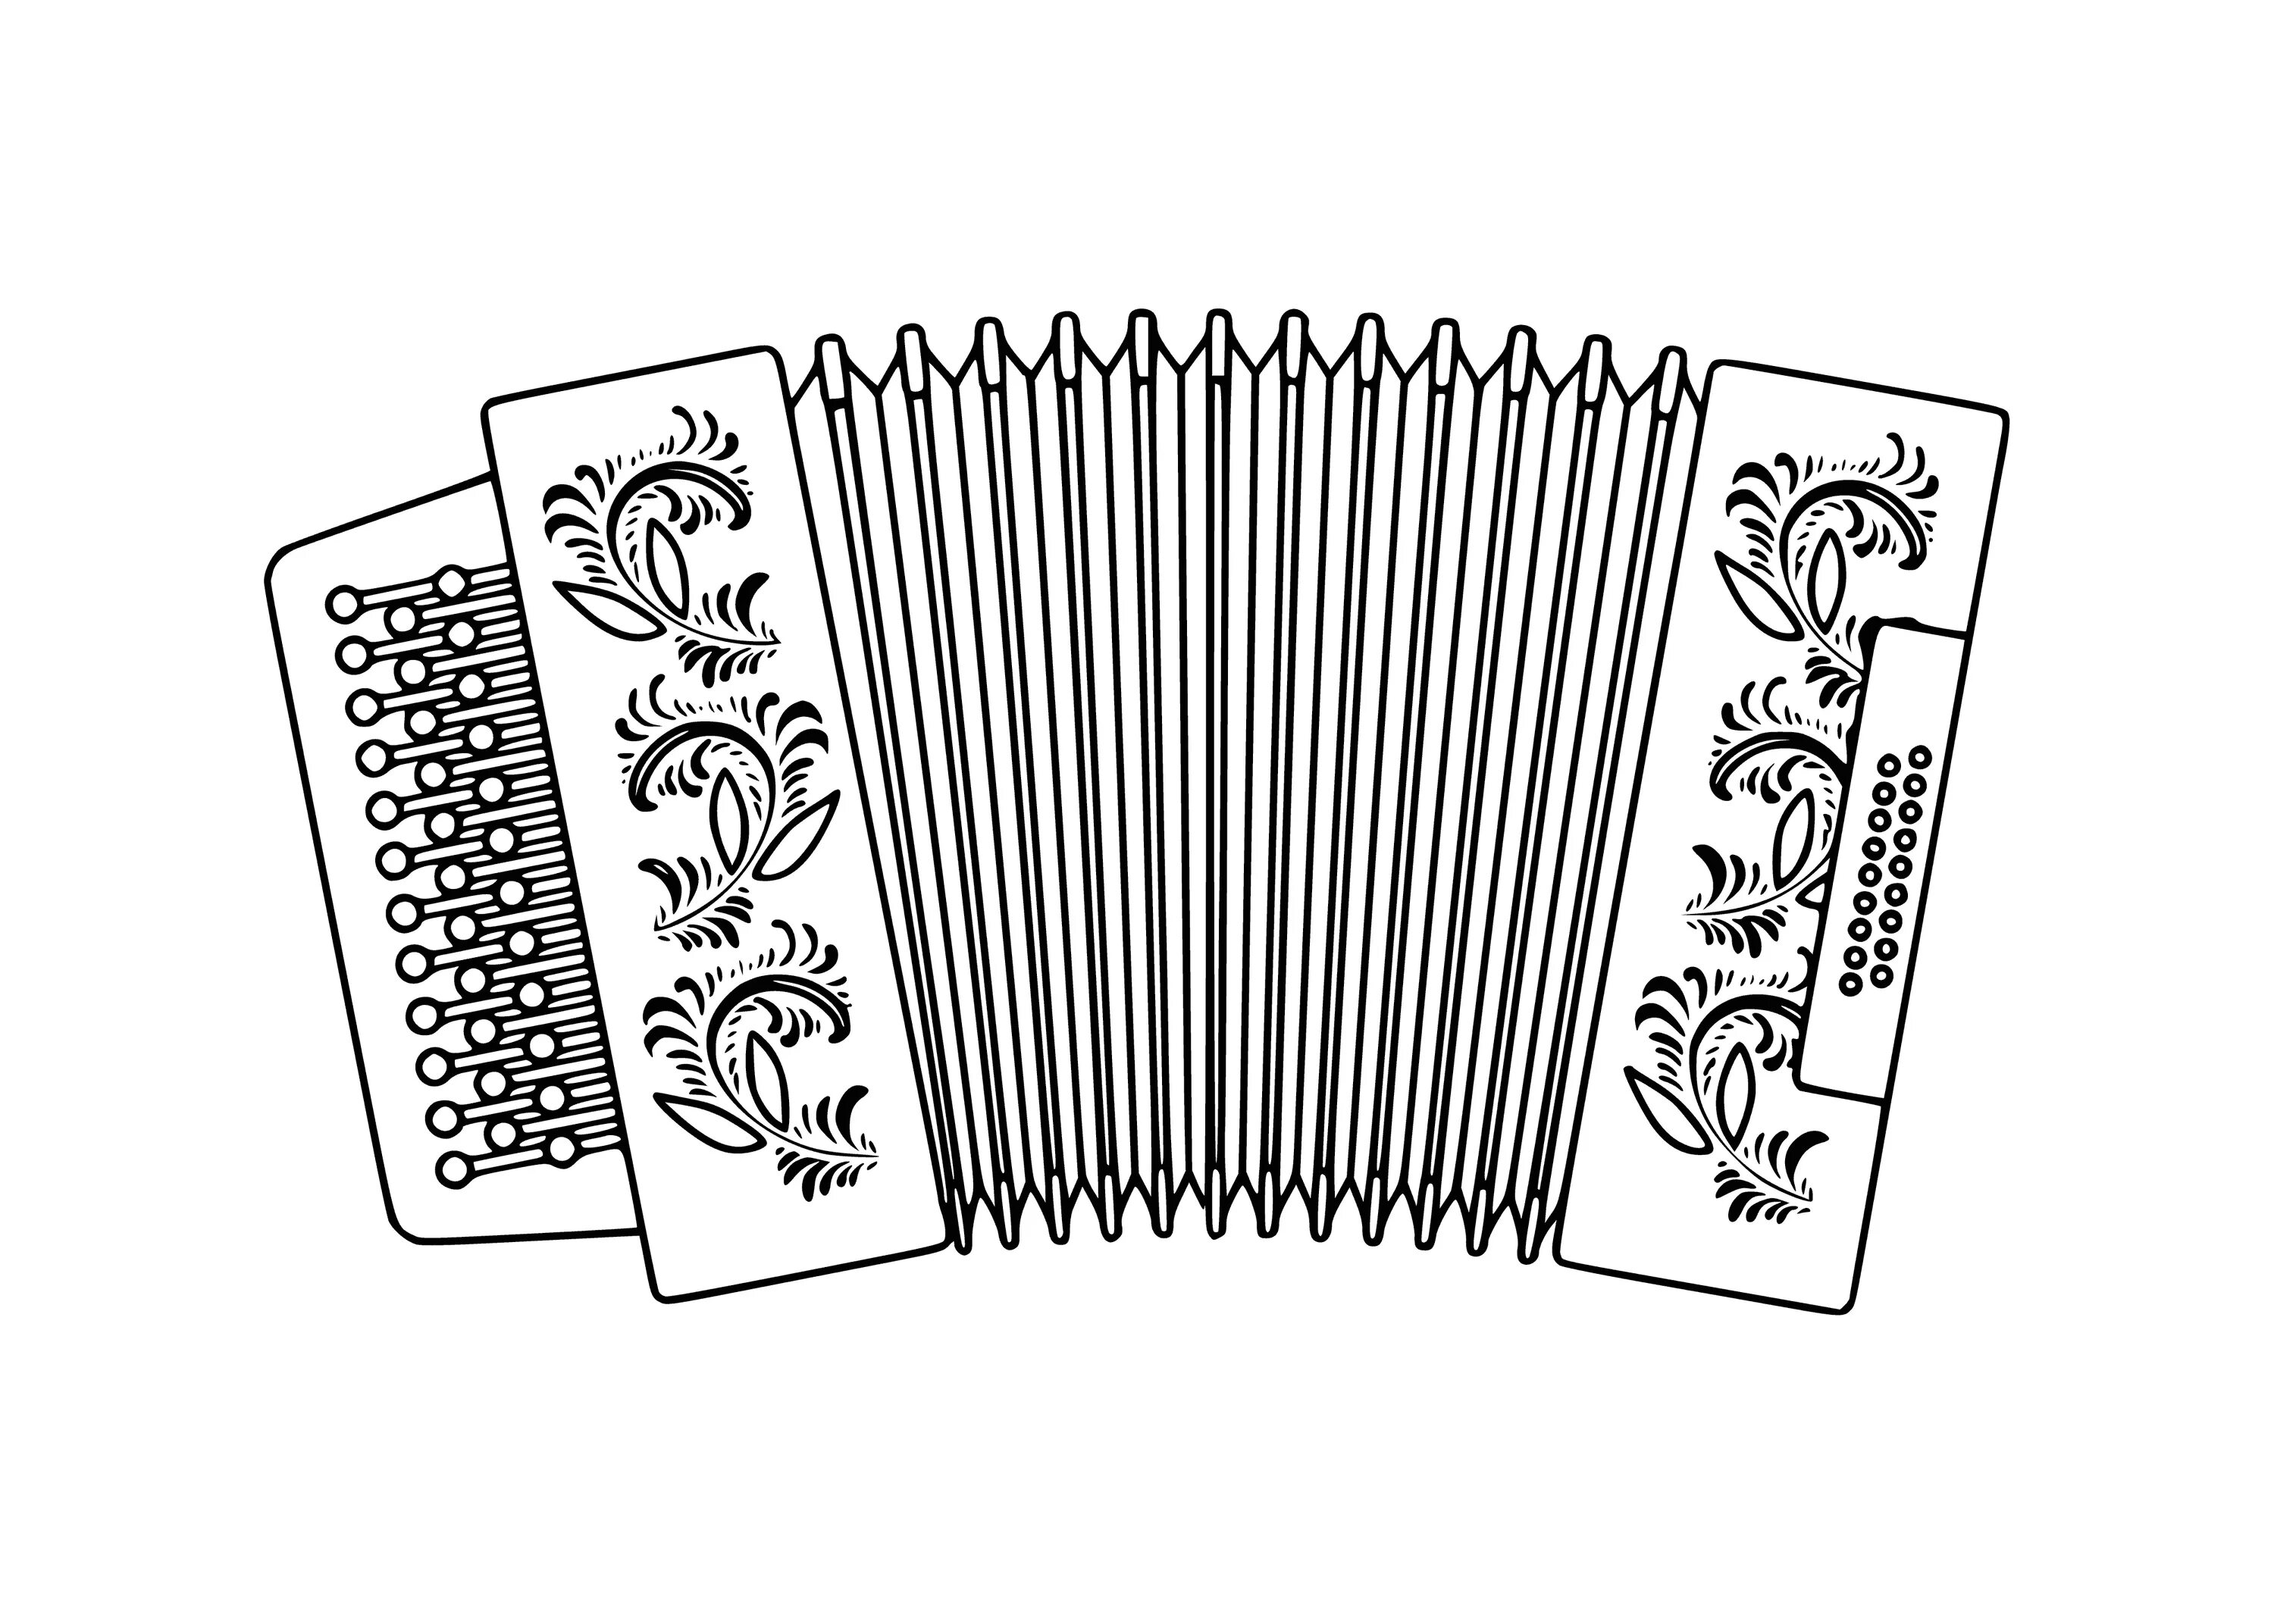 Exquisite accordion coloring book for kids